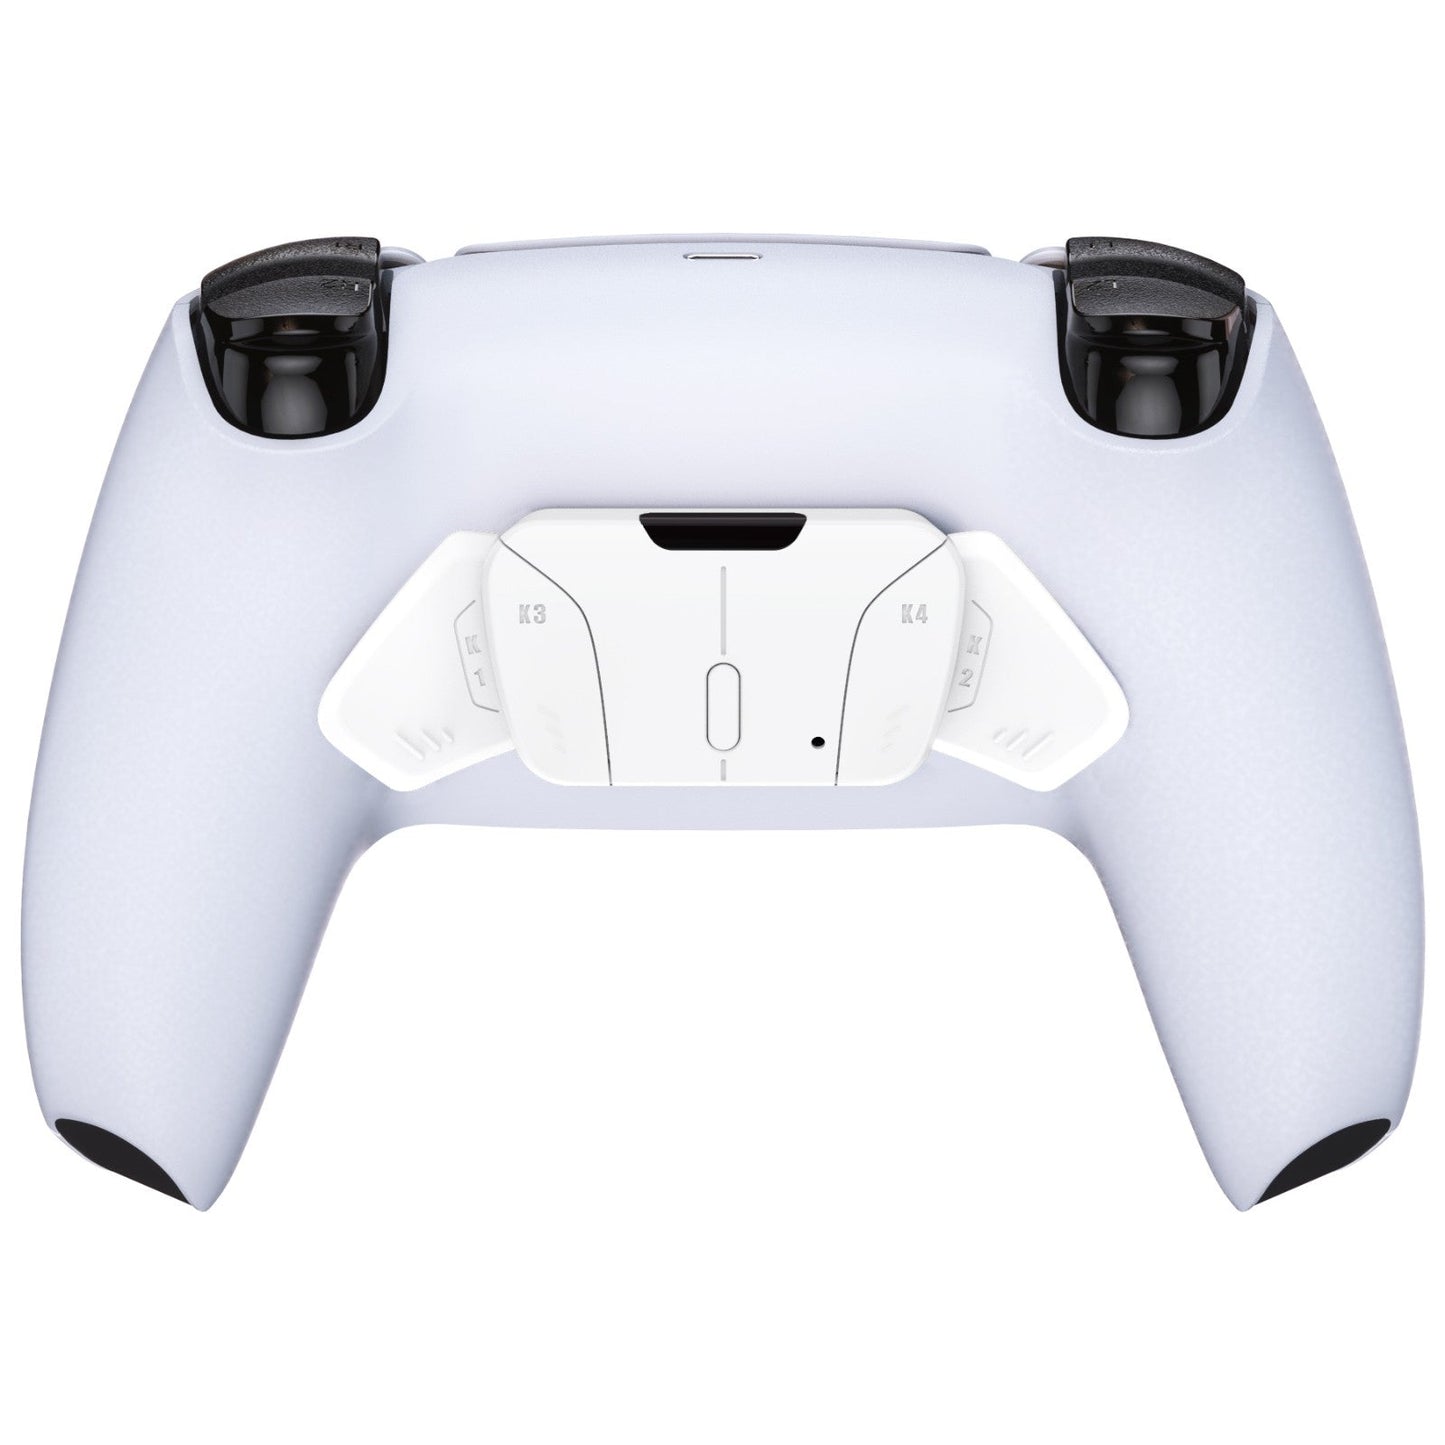 eXtremeRate Retail Turn RISE to RISE4 Kit-Redesigned White K1 K2 K3 K4 Back Buttons Housing & Remap PCB Board for ps5 Controller eXtremeRate RISE & RISE4 Remap kit - Controller & Other RISE Accessories NOT Included - VPFP3001P